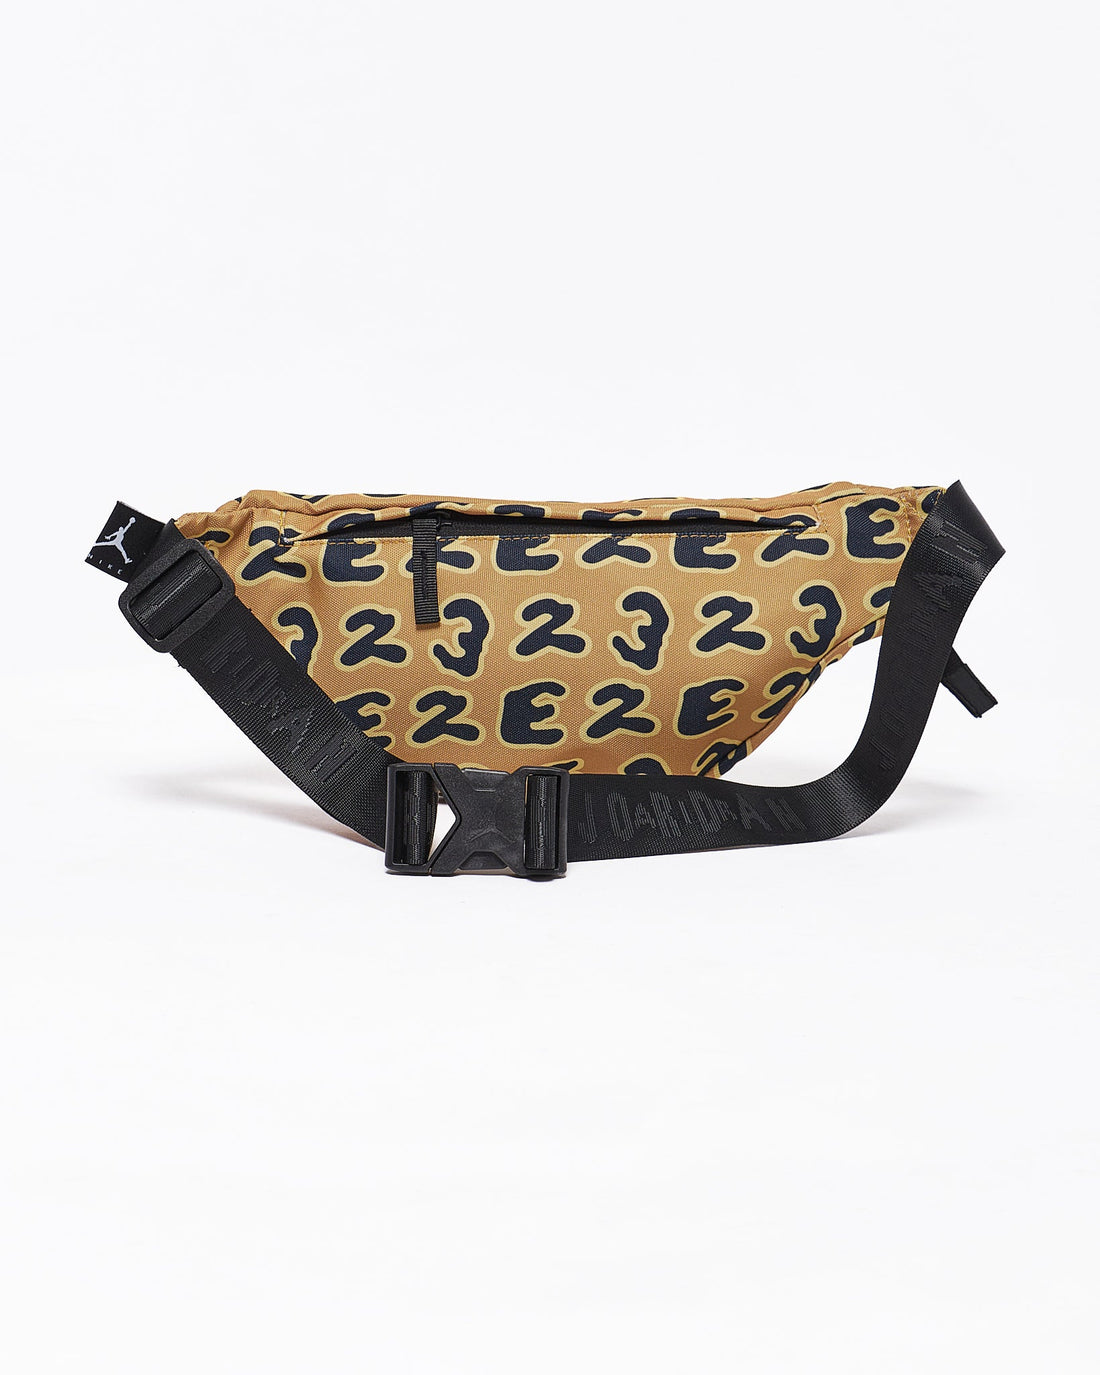 MOI OUTFIT-Number Over Printed Unisex Bumbag 16.90